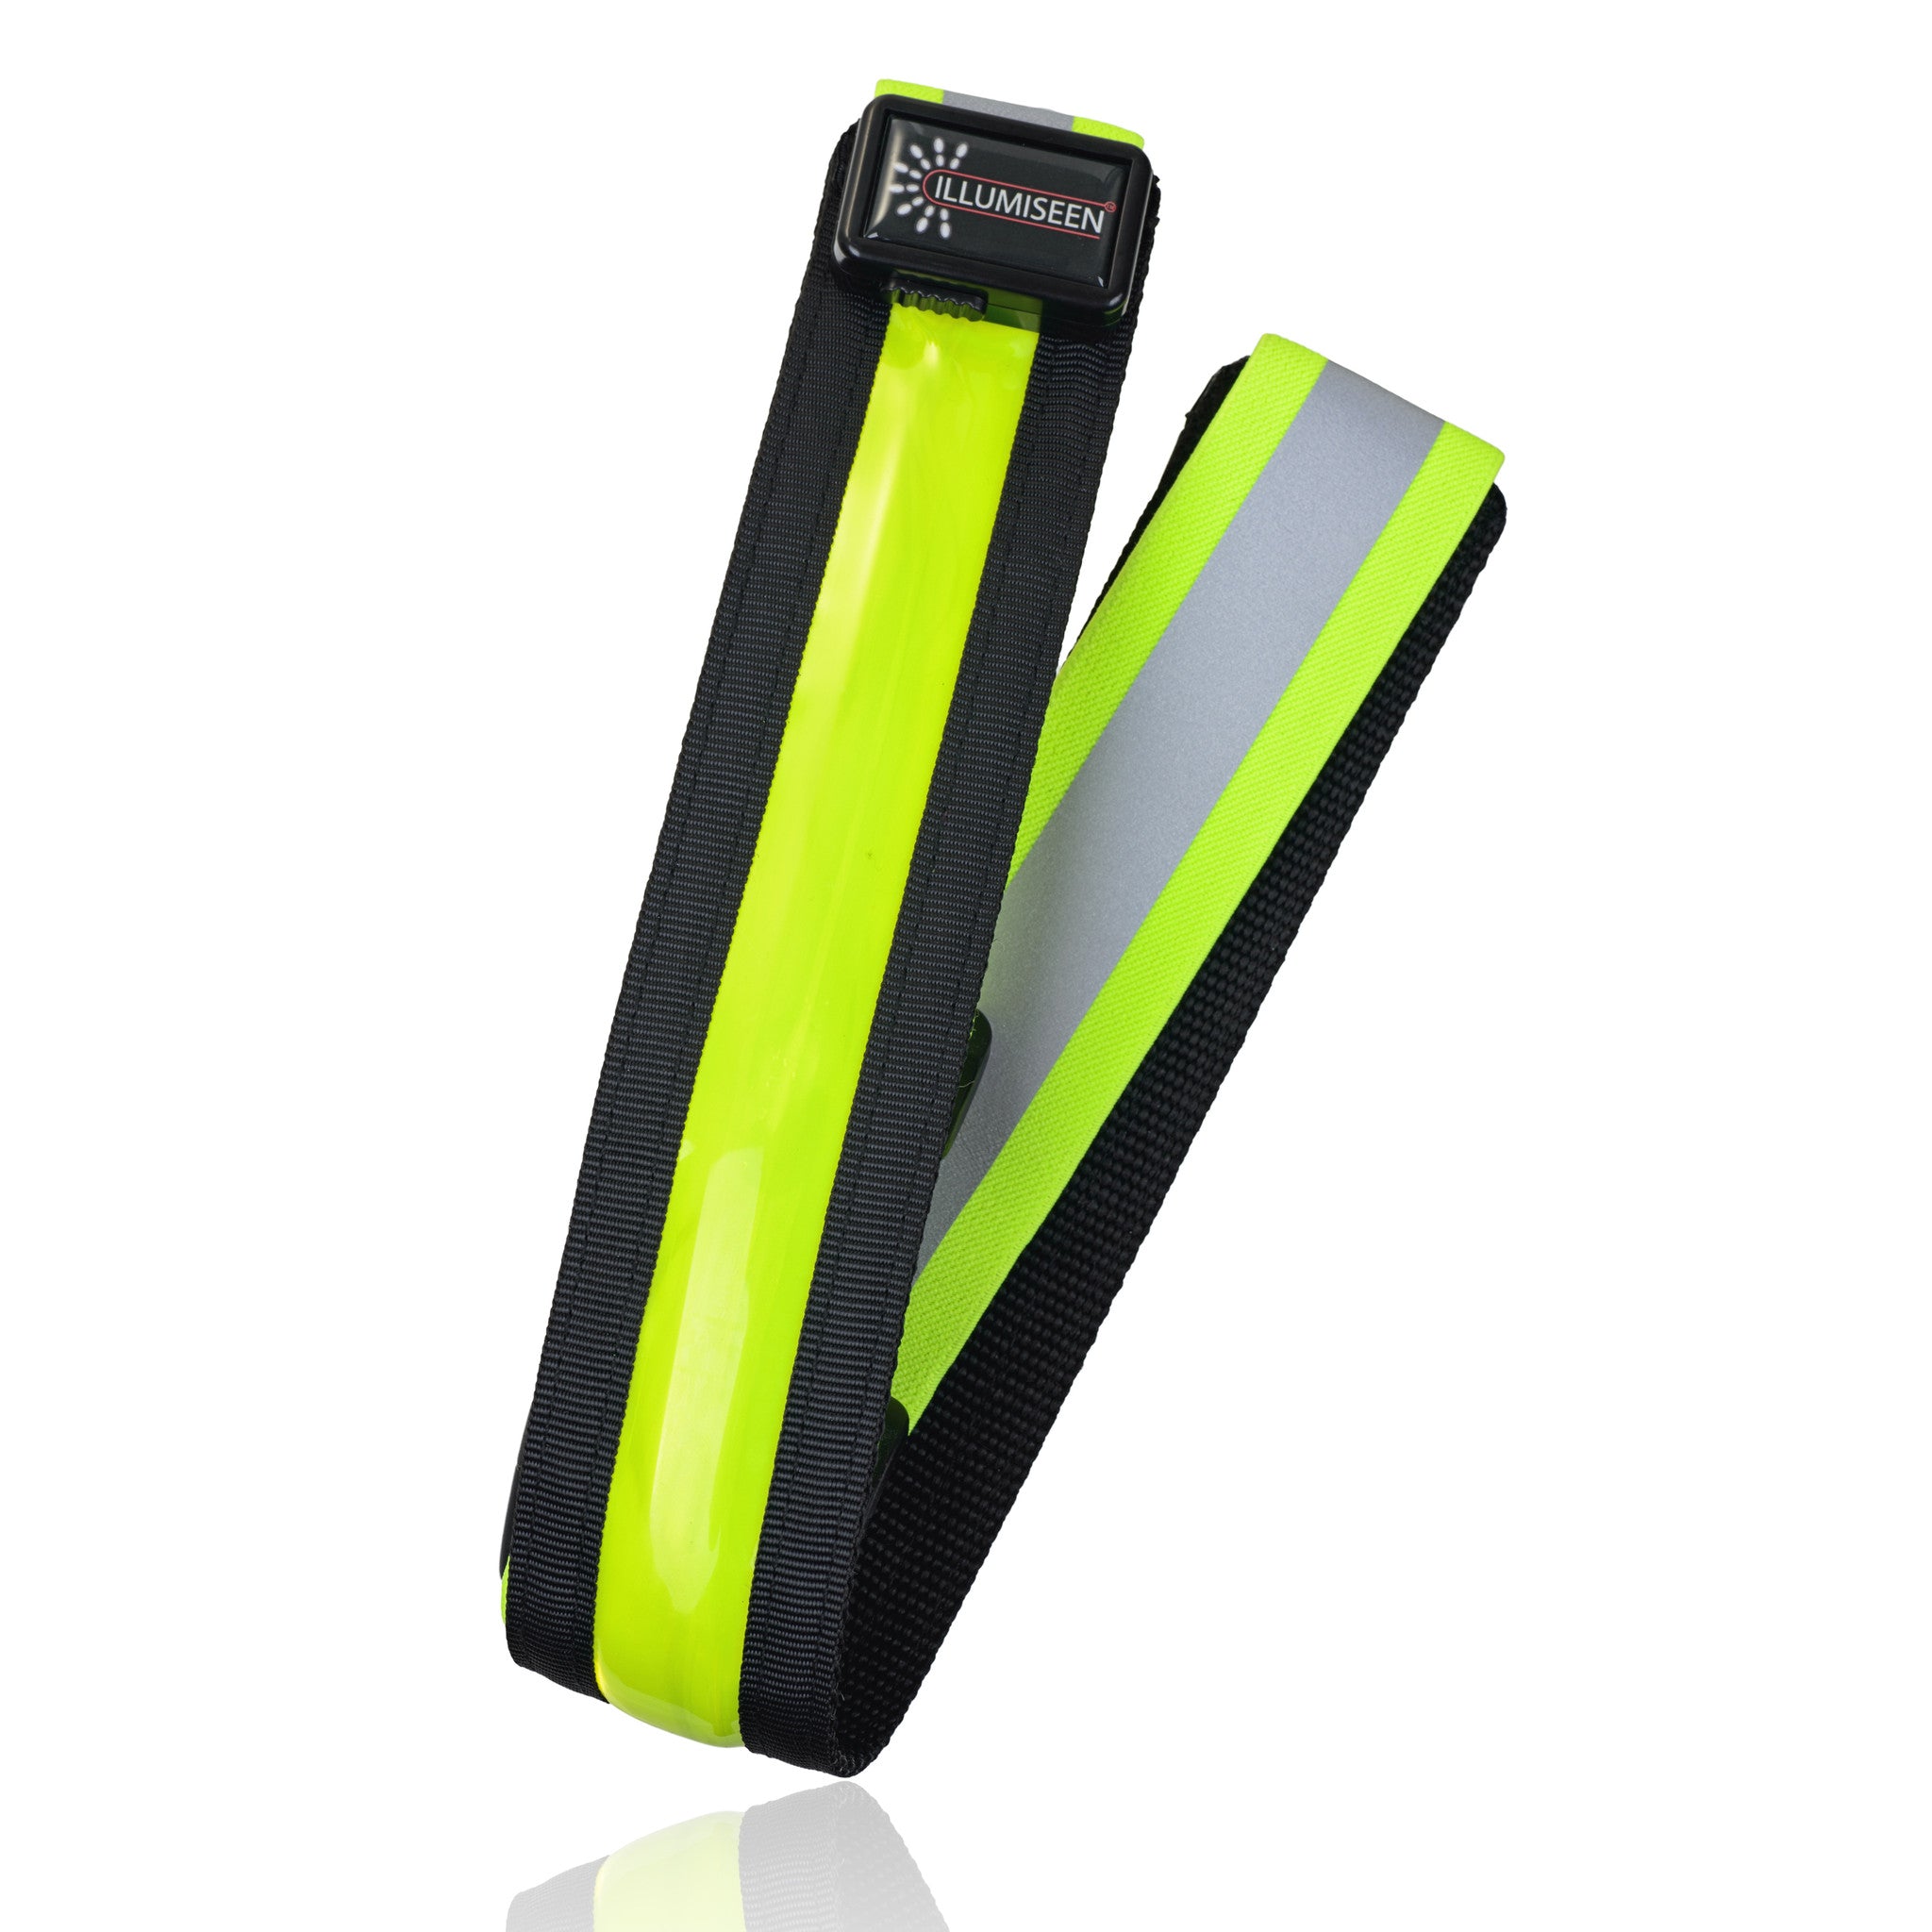  ILLUMISEEN LED Reflective Belt Sash, High Visibility LED  Lights with 2 Lighting Modes, Adjustable Quick Release Buckle, USB  Rechargeable, No Batteries Needed